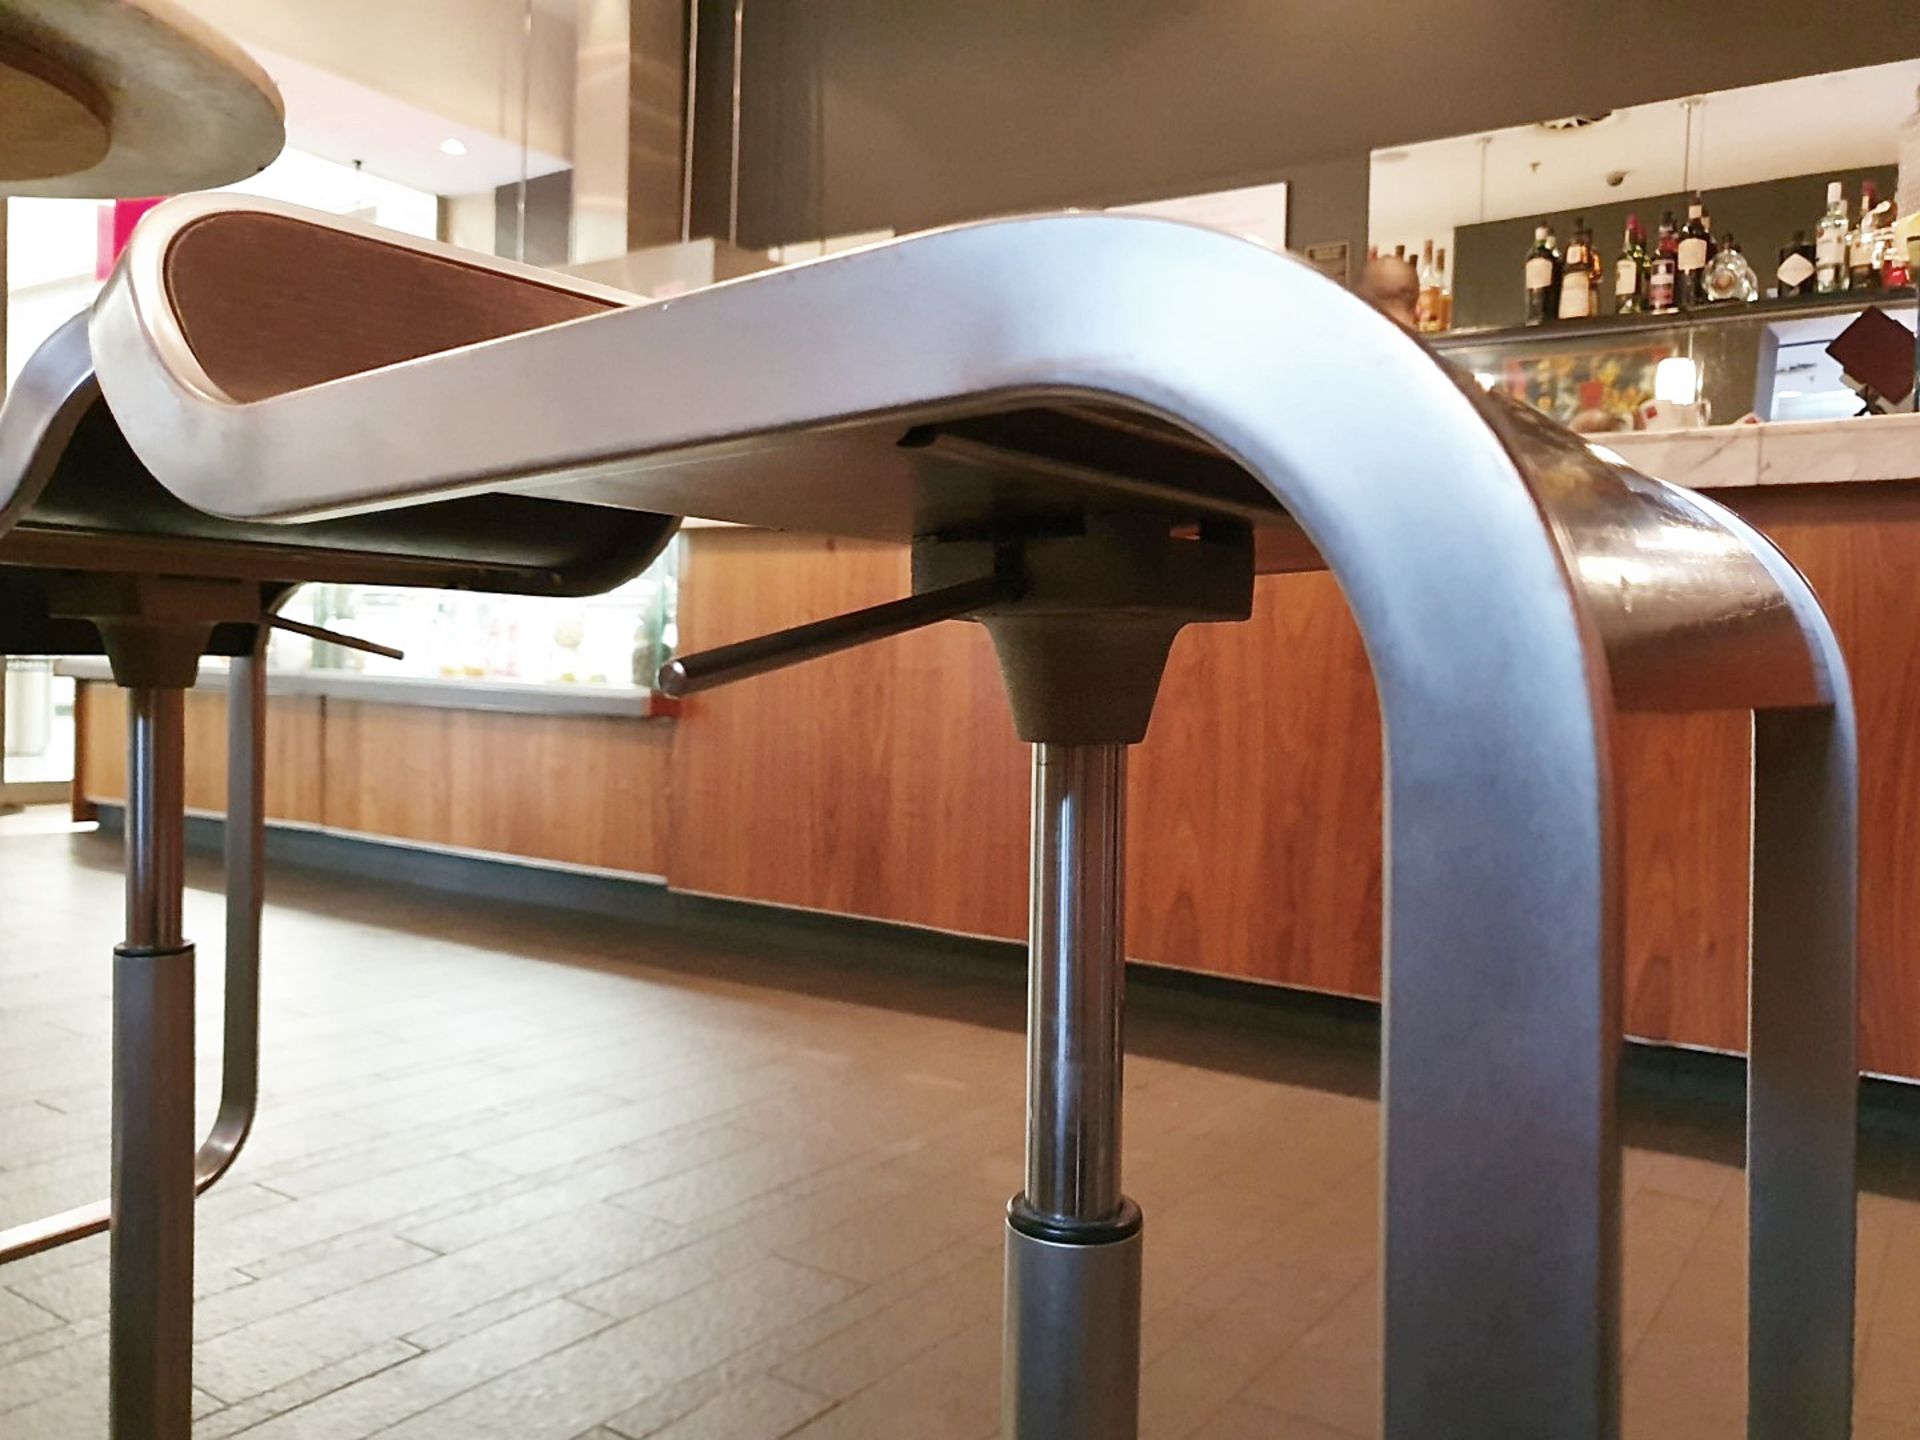 5 x Heavy Duty Commercial Bar Stools With Adjustable Hydraulic Aided Height - Dimensions: 35cm x - Image 3 of 8